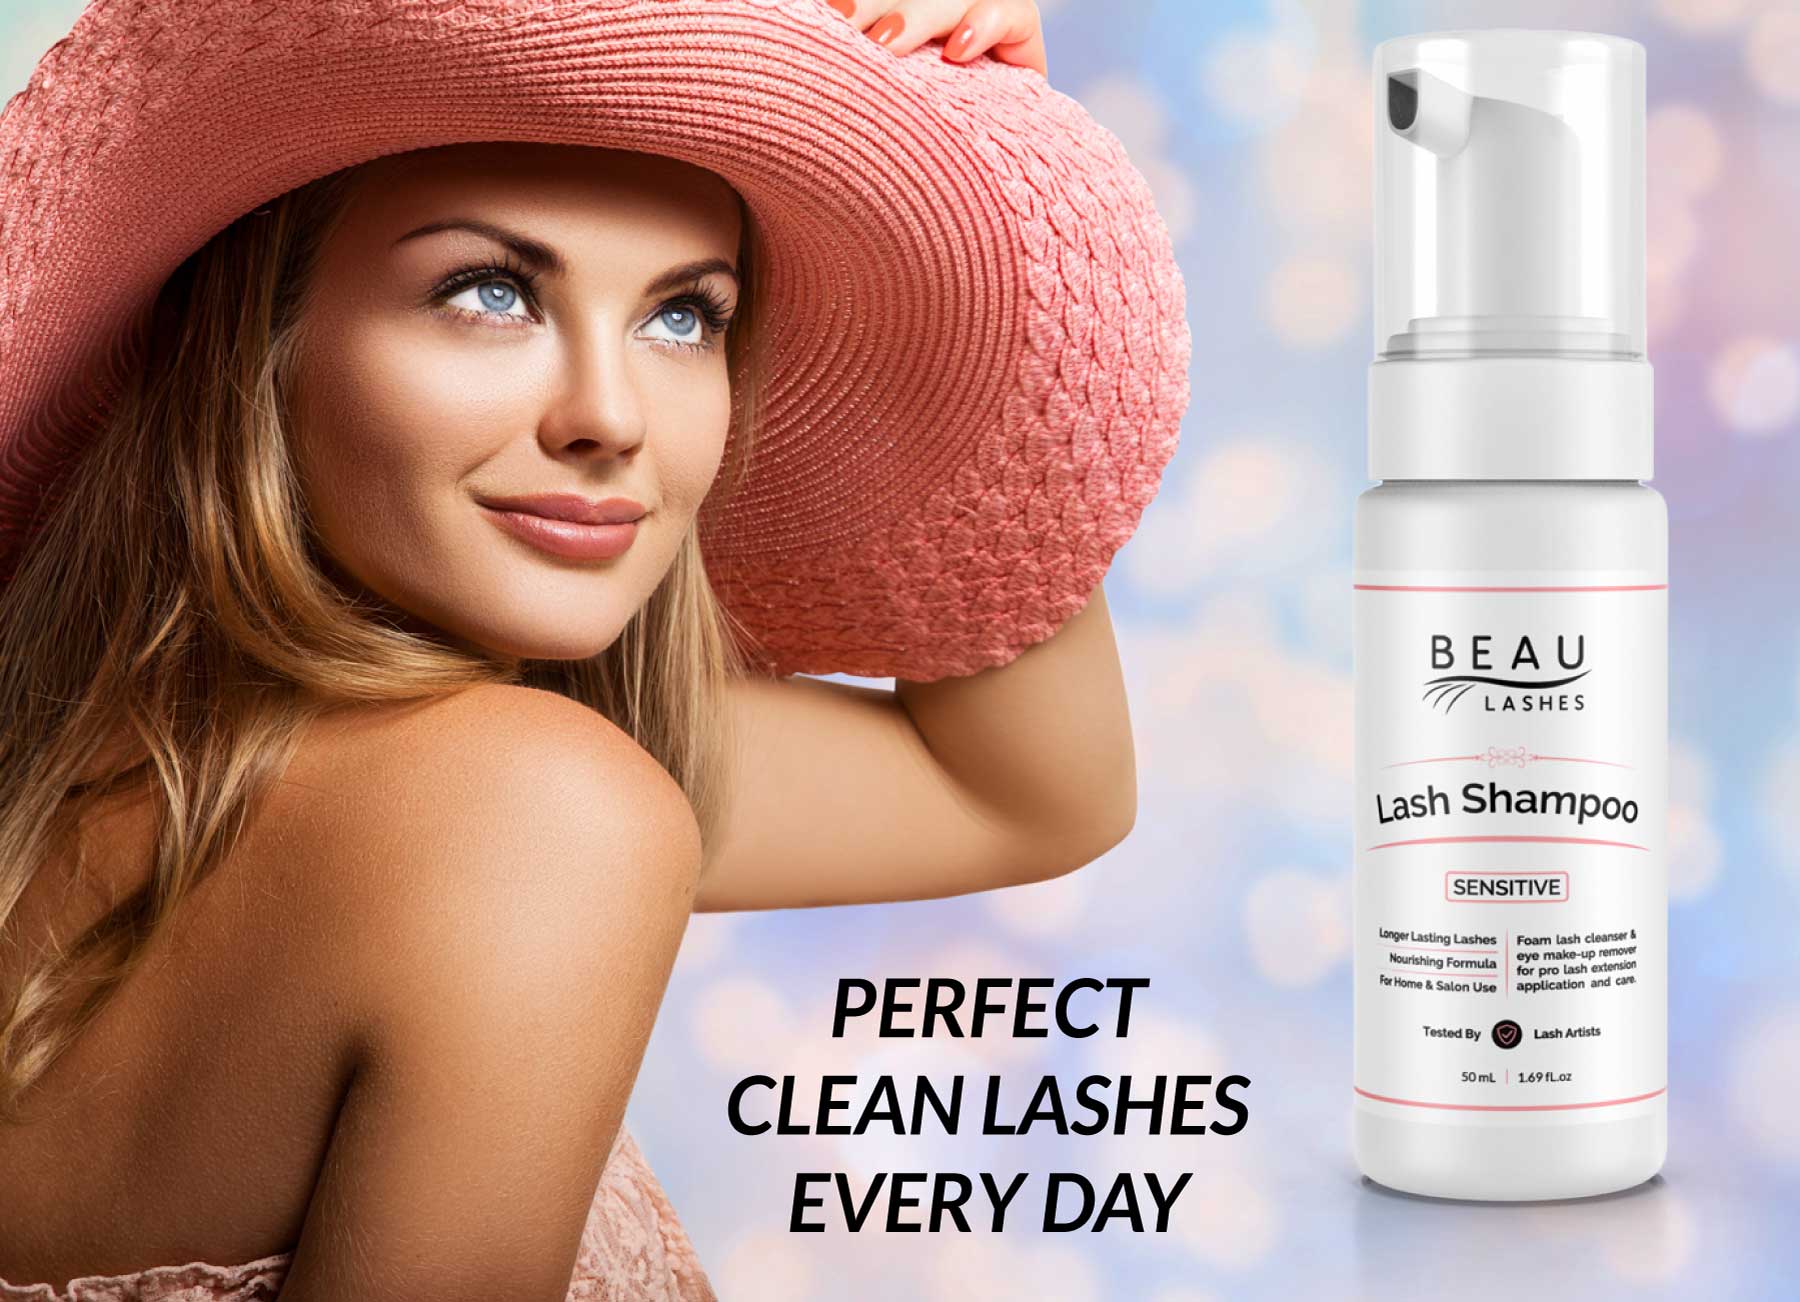 Beau Lashes Eyelash Extension Shampoo Wash Cleanser Bottle With Model Perfect Clean Lashes Every Day